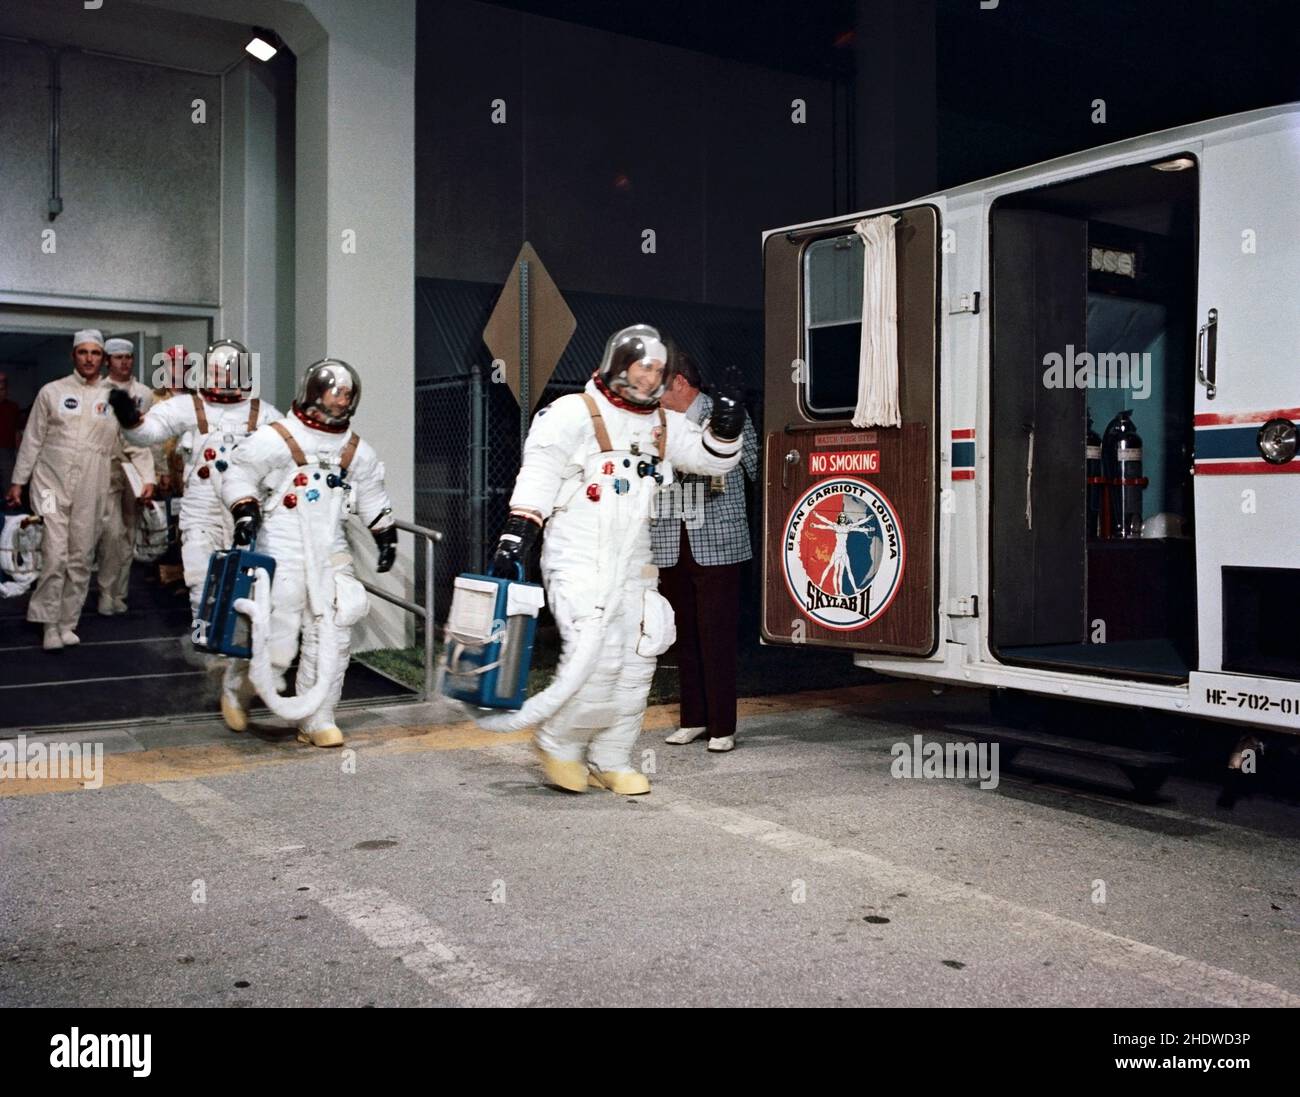 (28 July 1973) --- The three crewmen of the second manned Skylab mission (Skylab 3) leave the Manned Spacecraft Operations Building at the Kennedy Space Center on the morning of the Skylab 3 launch. Leading is astronaut Alan L. Bean, commander; followed by scientist-astronaut Owen K. Garriott, science pilot; and astronaut Jack R. Lousma, pilot. They entered the special van which carried them to Pad B at KSC?s Launch Complex 39 where the Skylab 3/Saturn 1B space vehicle awaited them. The Skylab 3 liftoff was at 7:11 a.m. (EDT), Saturday, July 28, 1973. The three astronauts were scheduled to spe Stock Photo